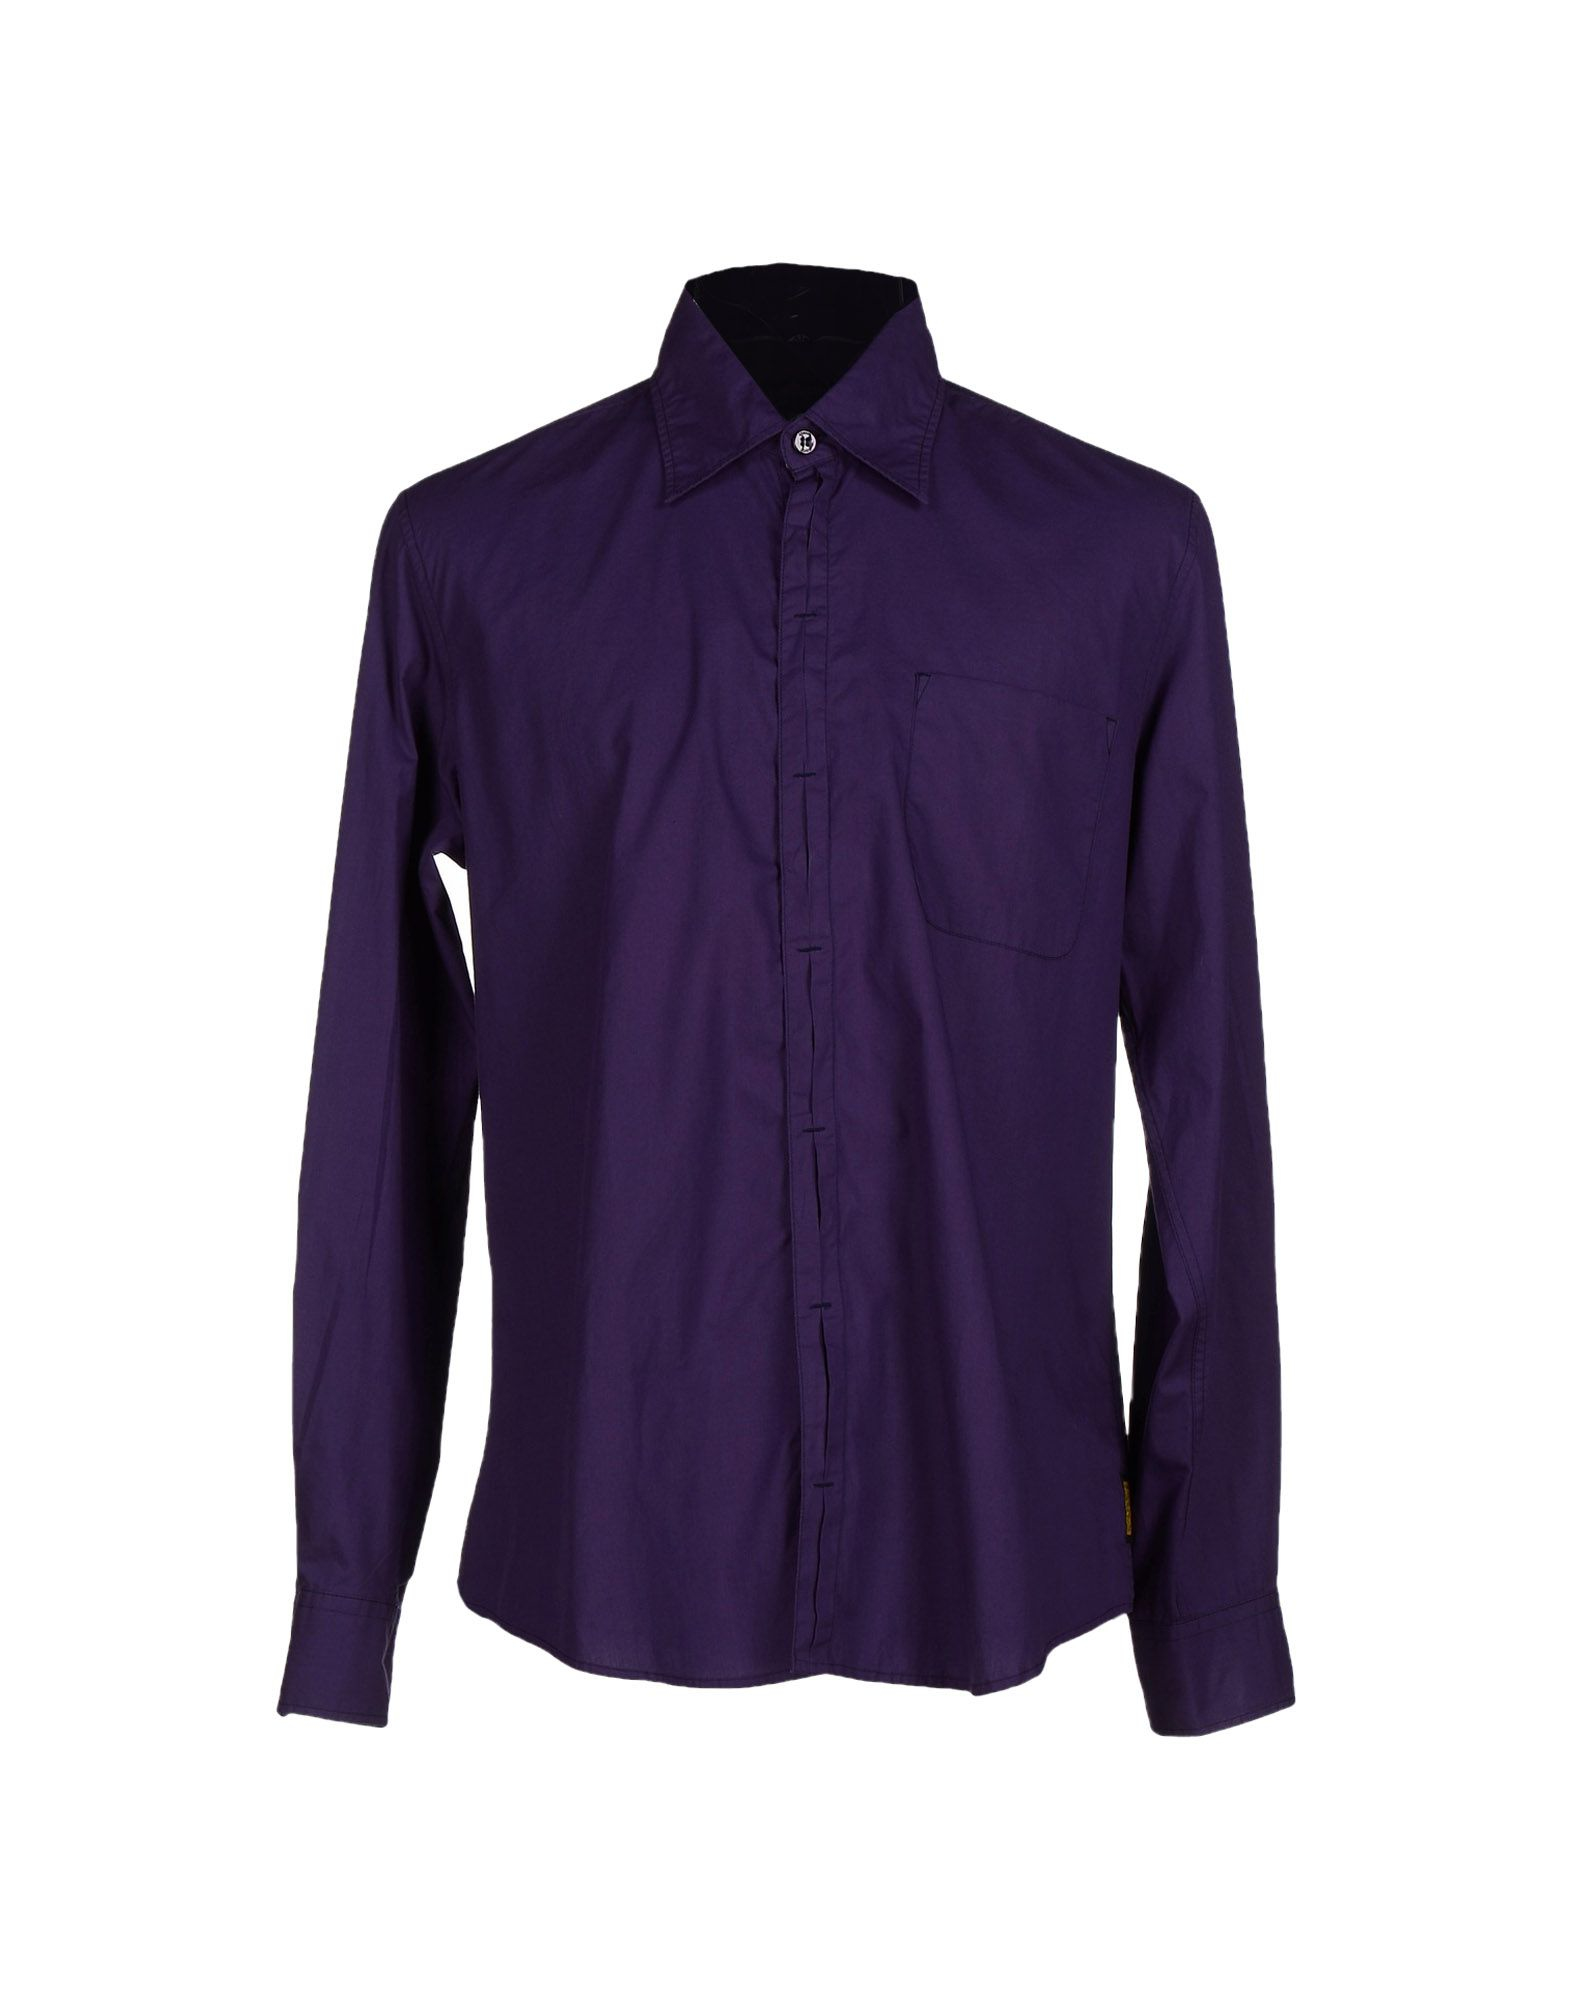 Armani jeans Shirt in Purple for Men | Lyst